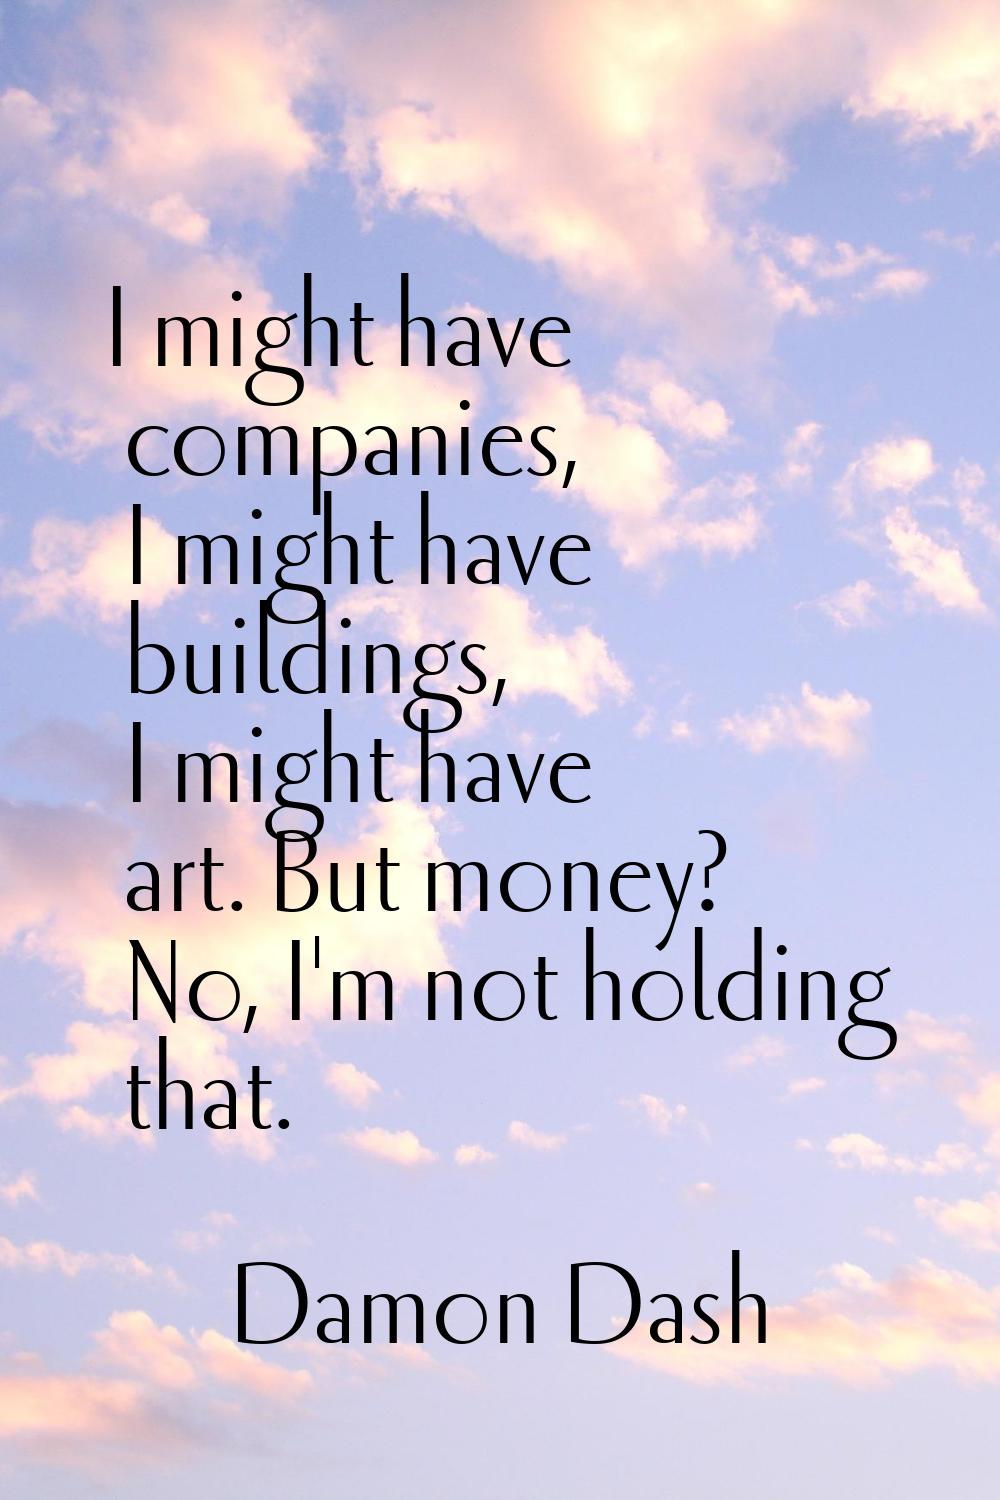 I might have companies, I might have buildings, I might have art. But money? No, I'm not holding th